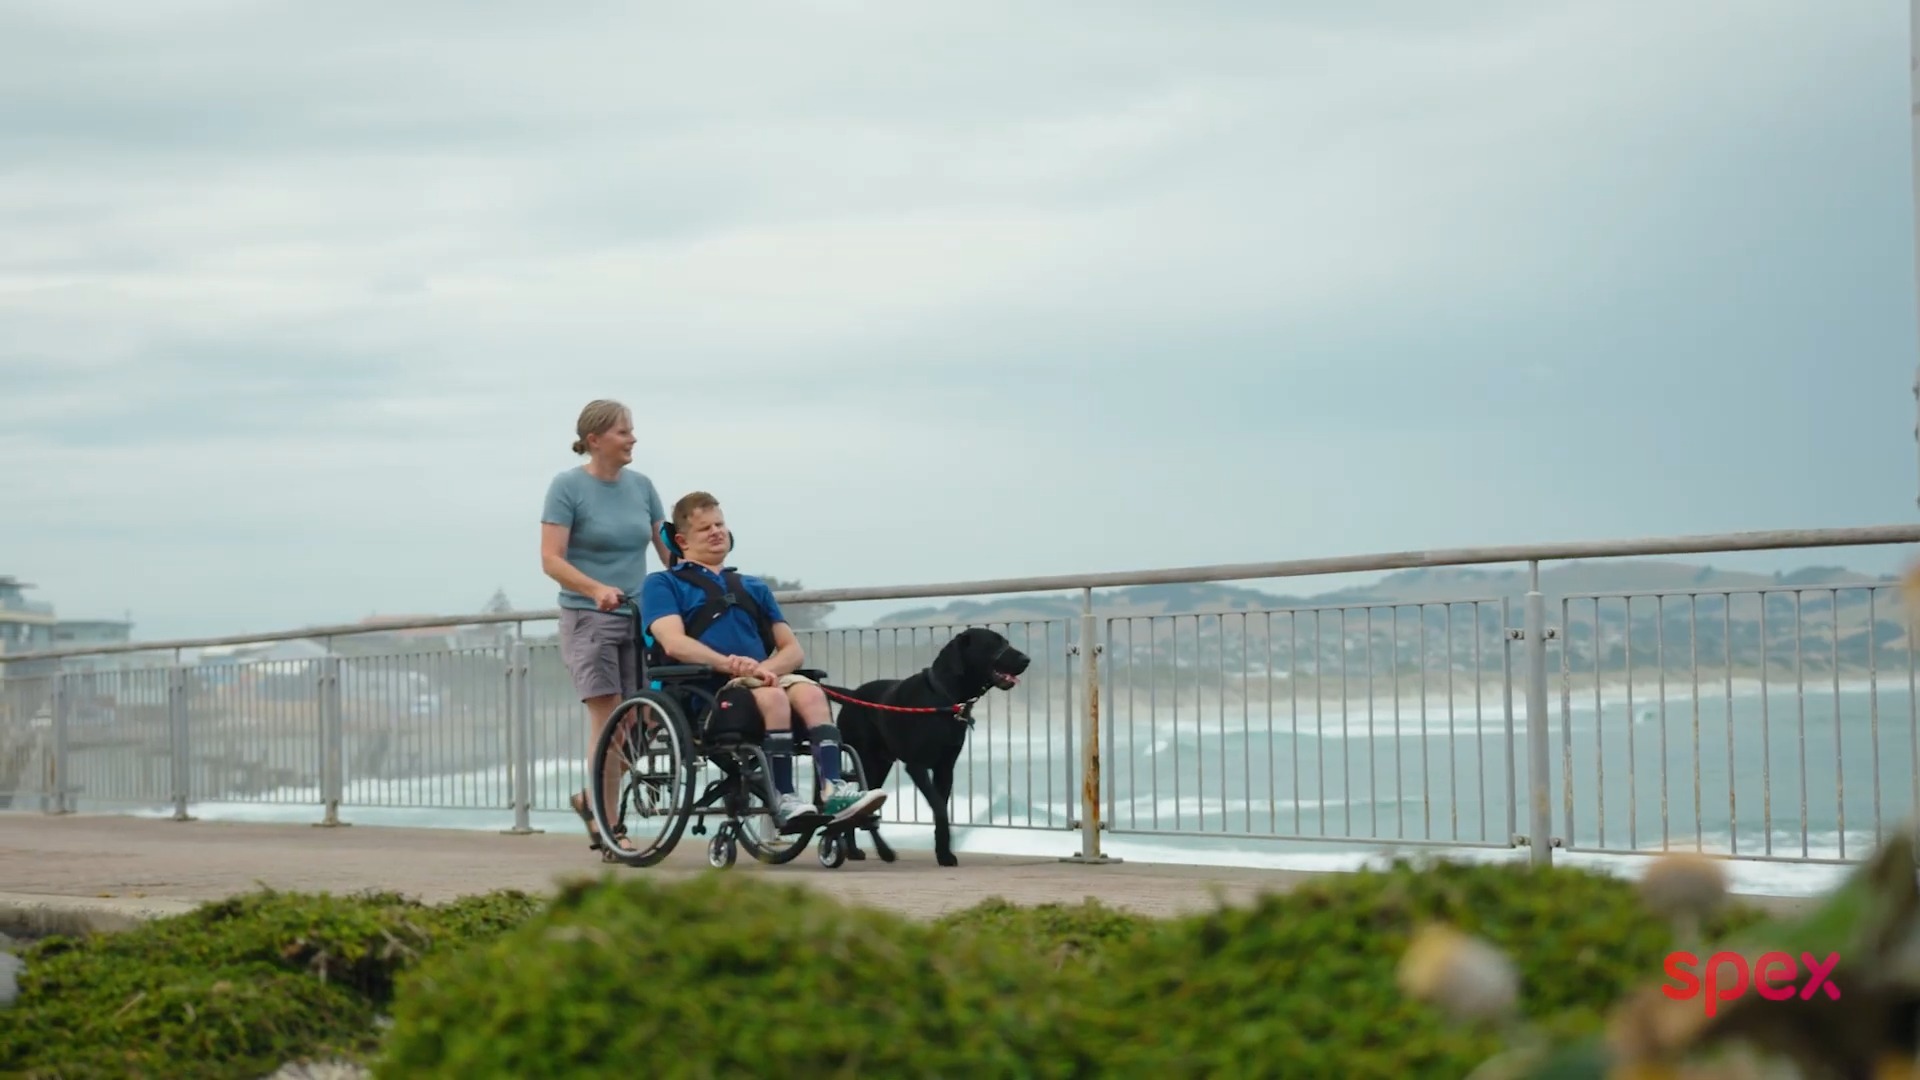 Callum enjoying using his SPEX equipment as he goes for a ride with his dog near the beach